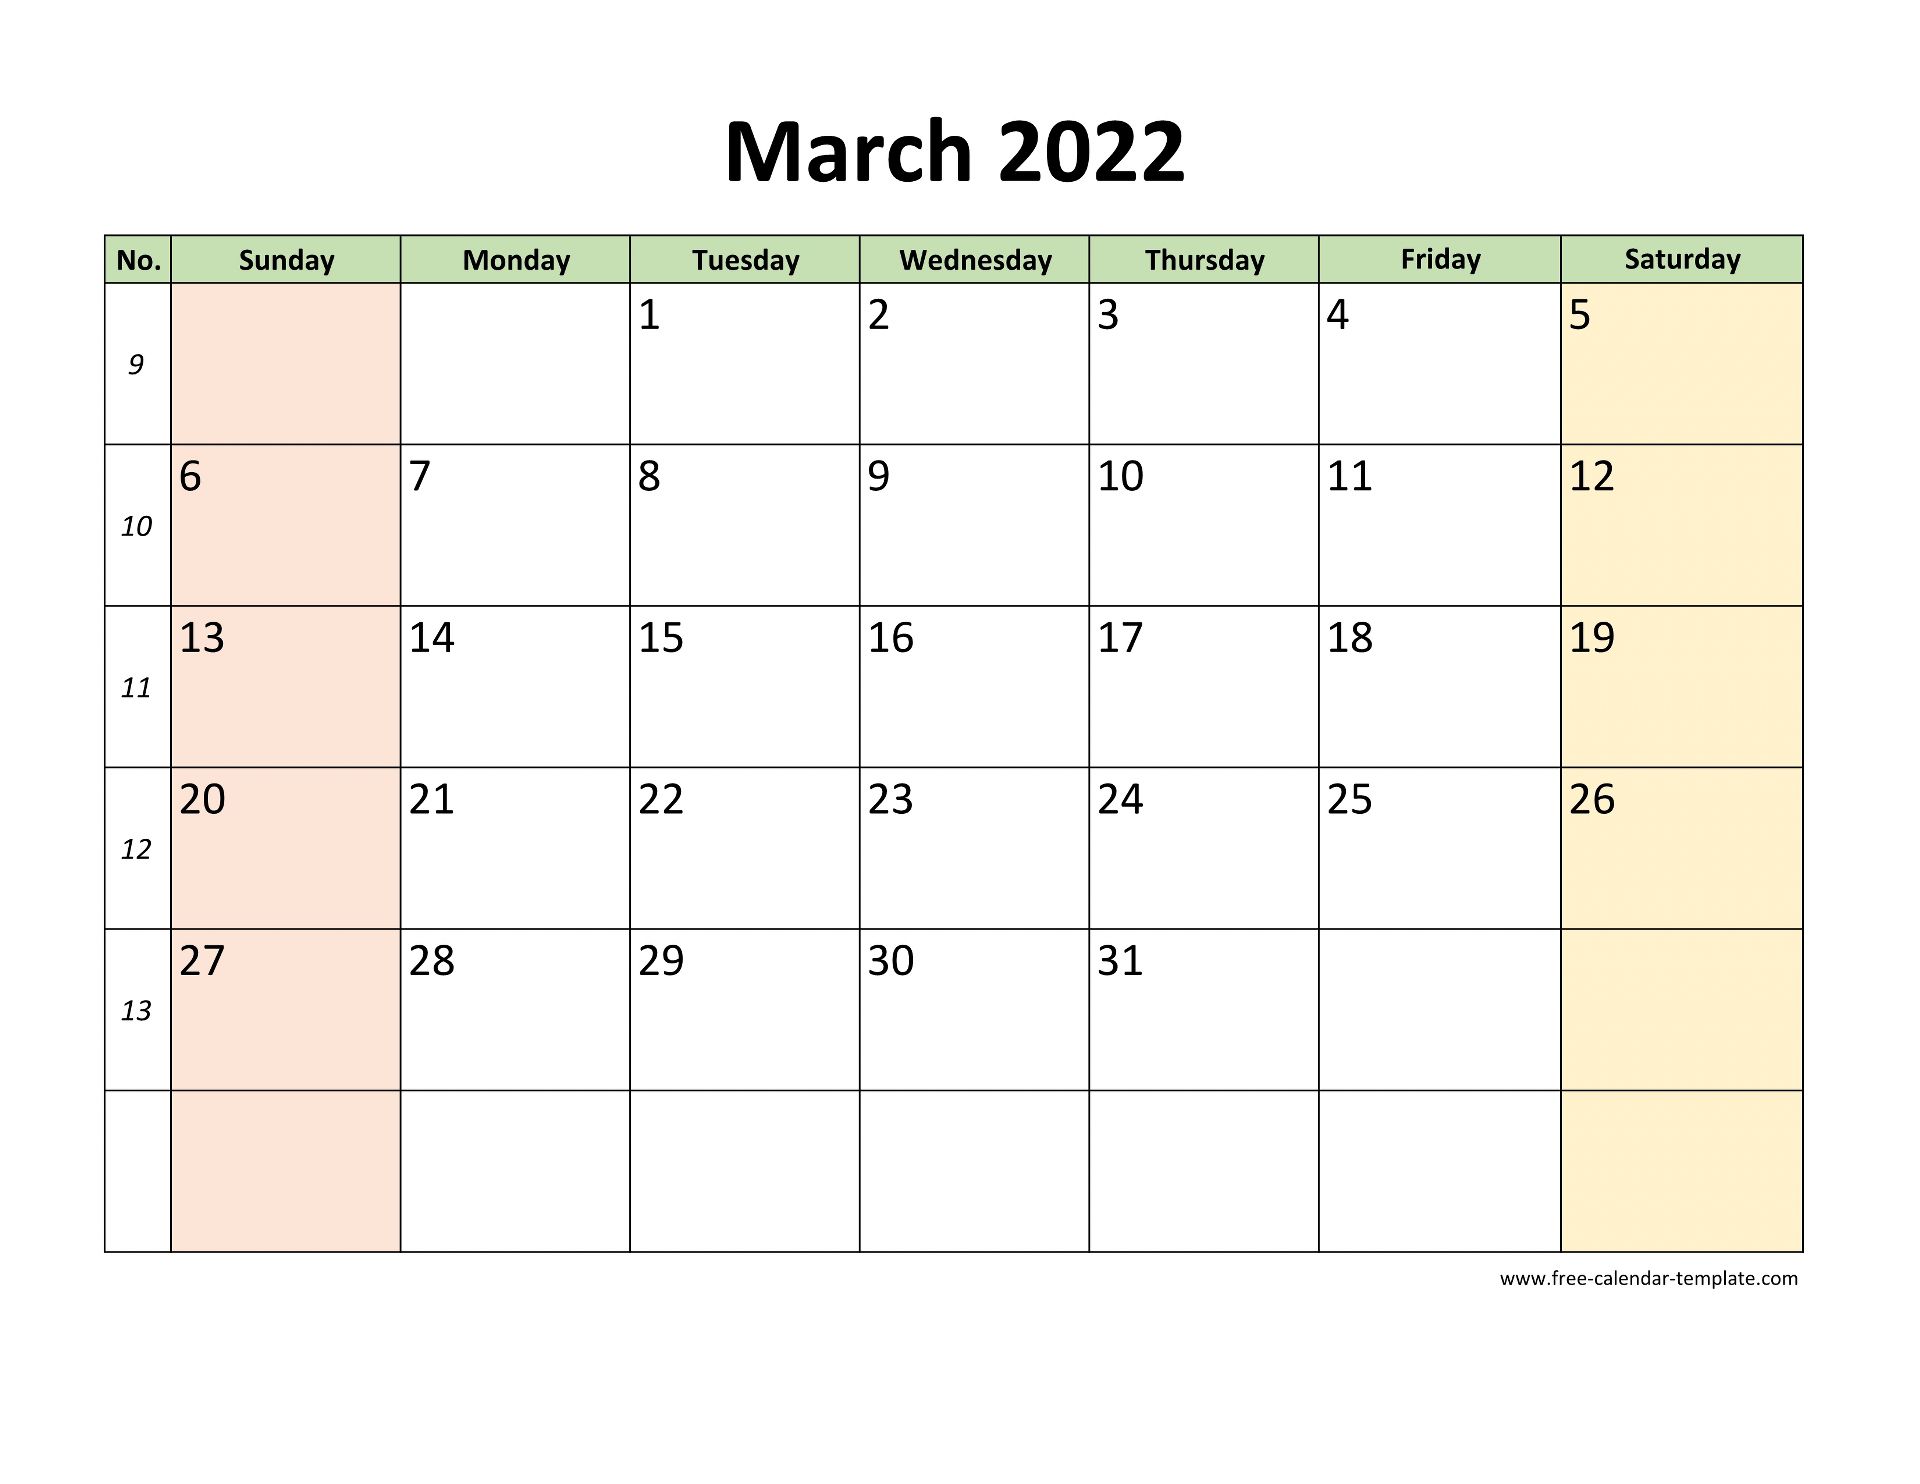 March 2022 Calendar Printable with coloring on weekend (horizontal